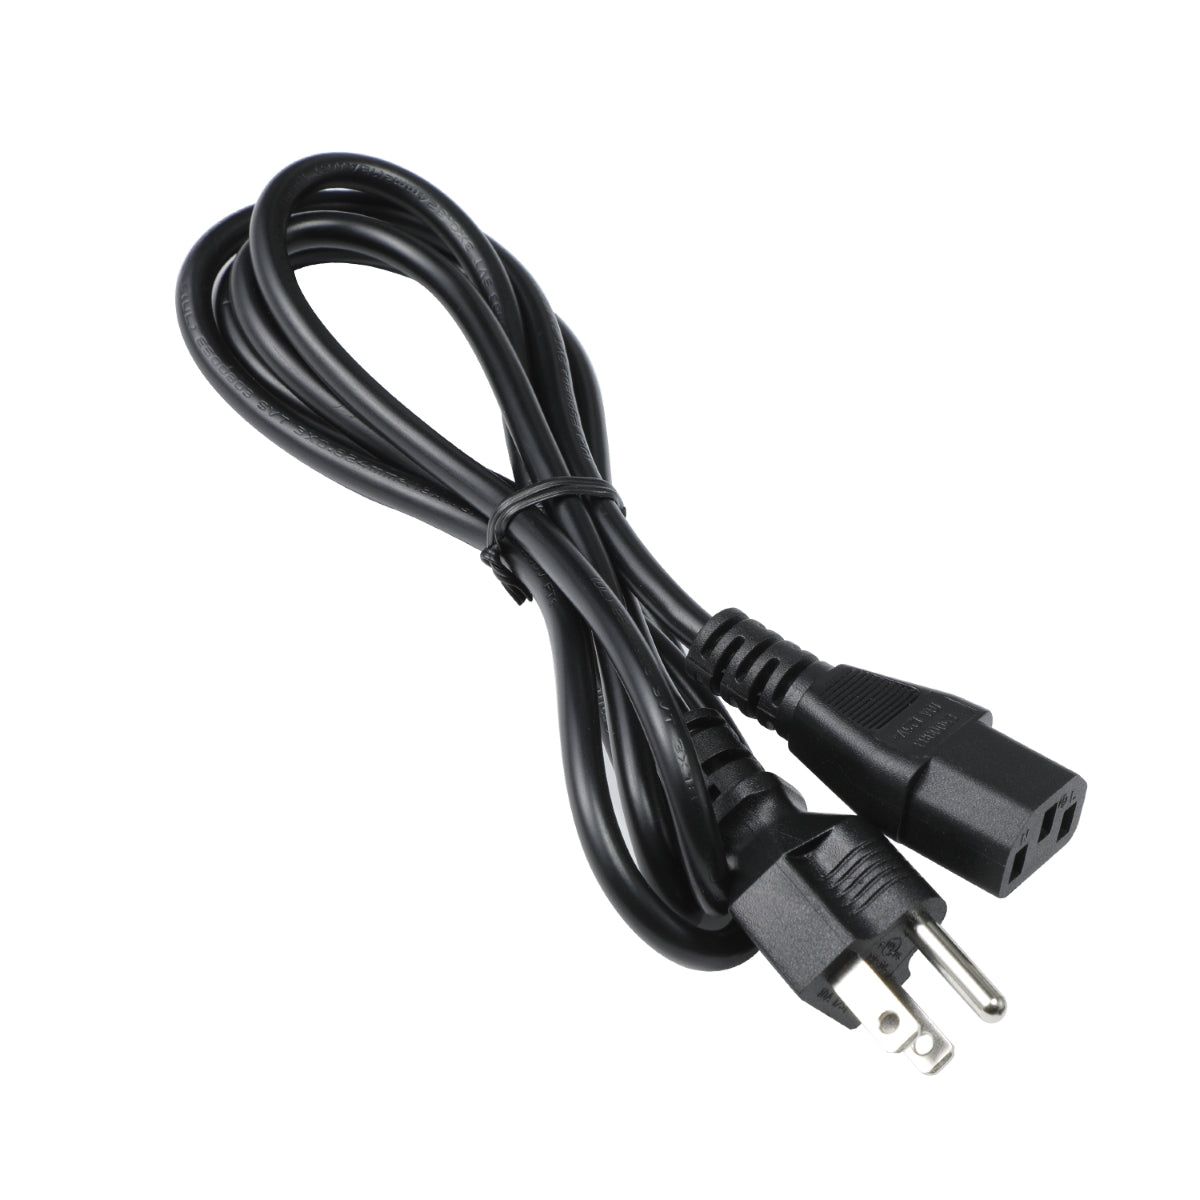 Power Cord for ViewSonic VG2448 Display